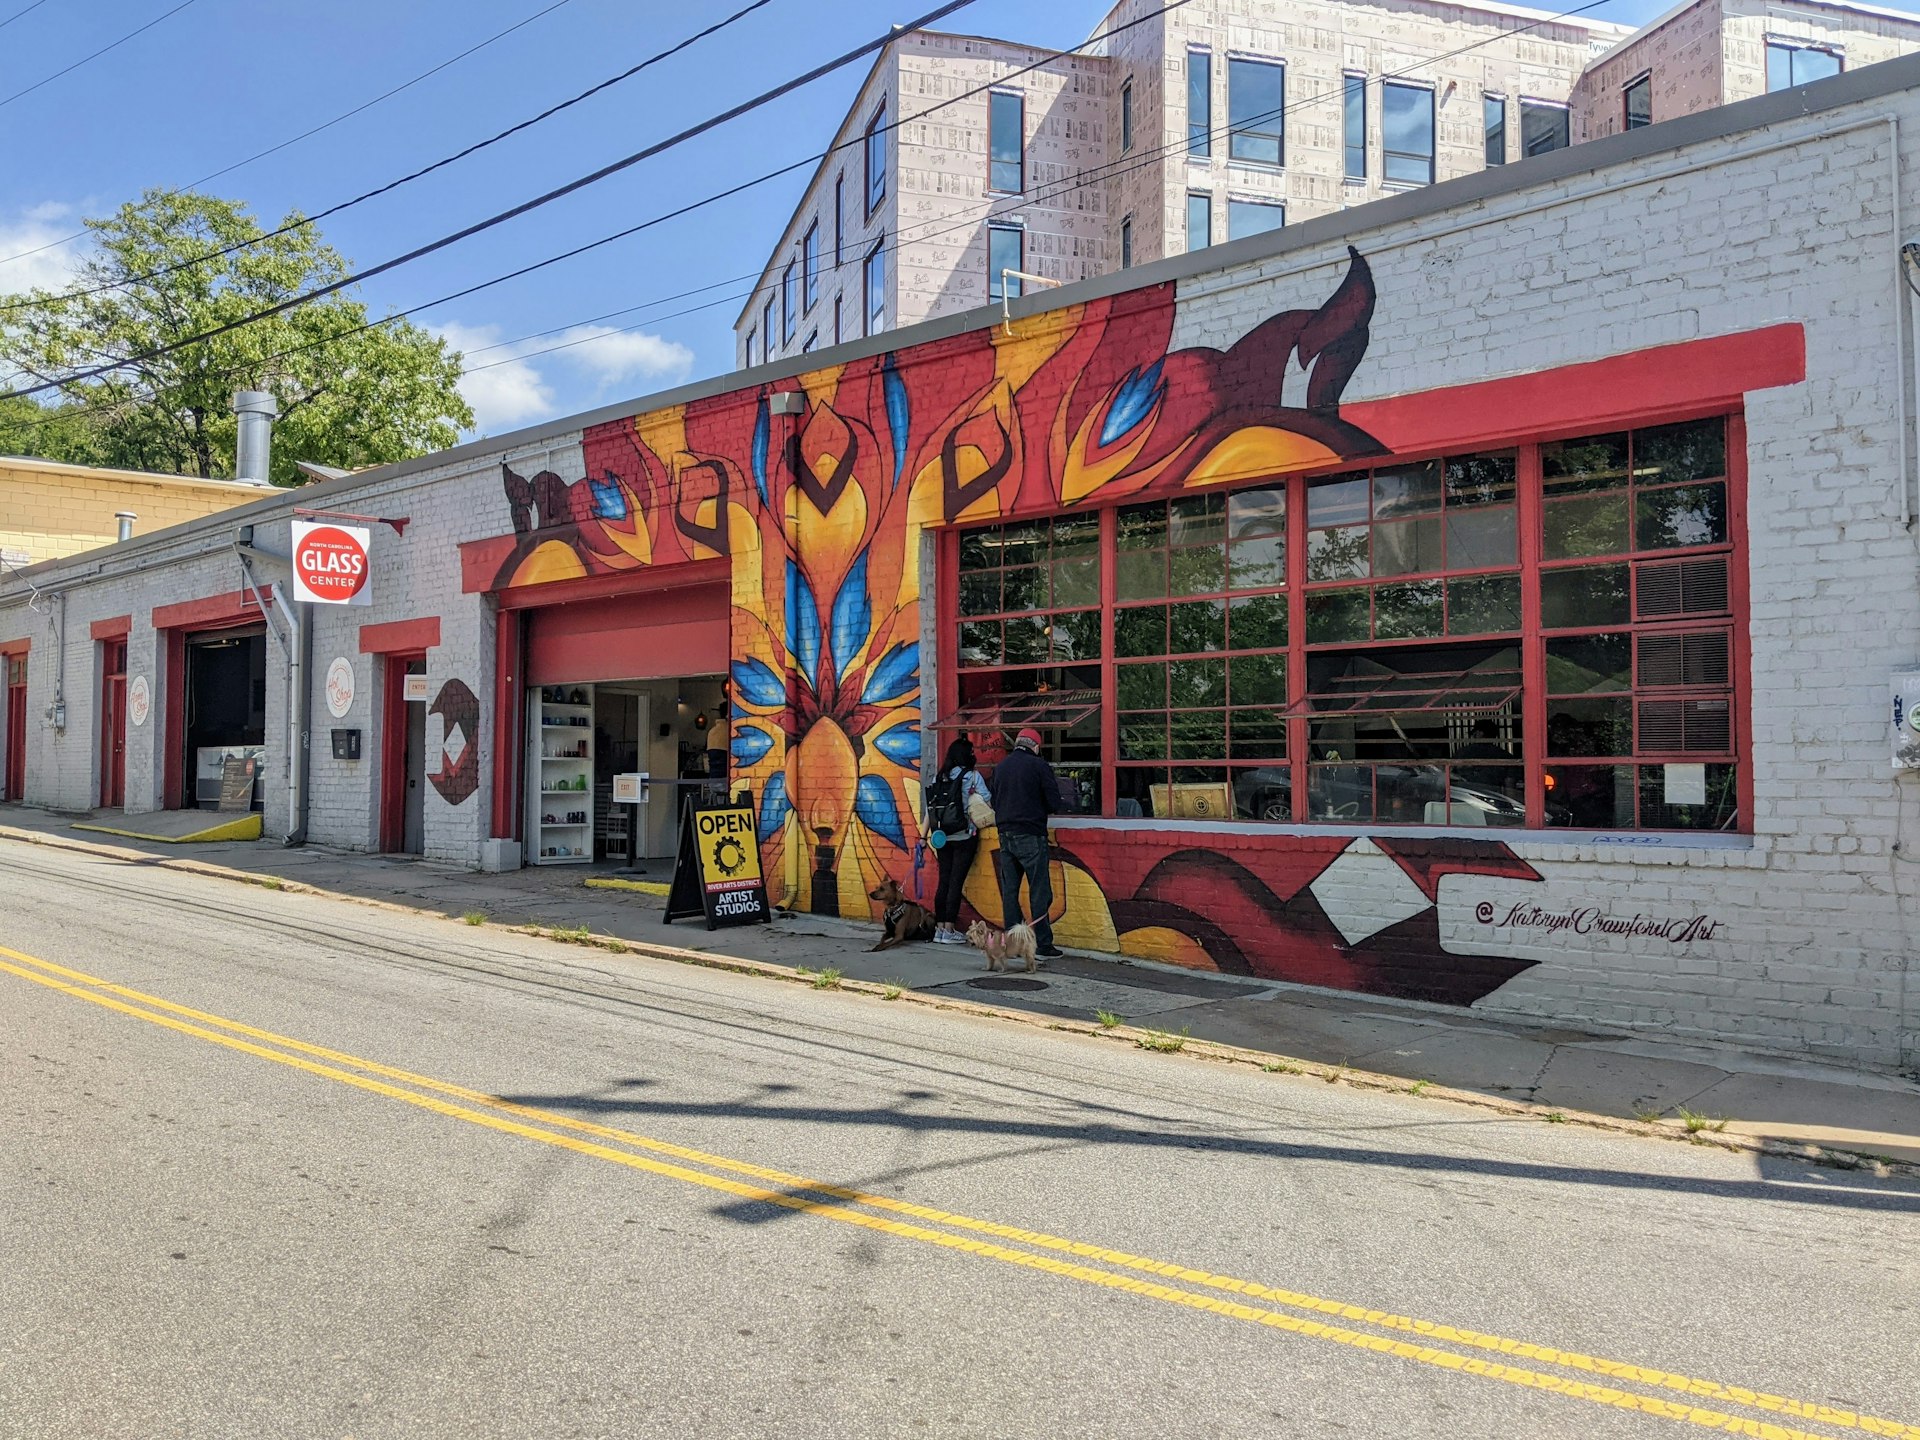 A colorful mural outside a glass studio in the River Arts District of Asheville, North Carolina